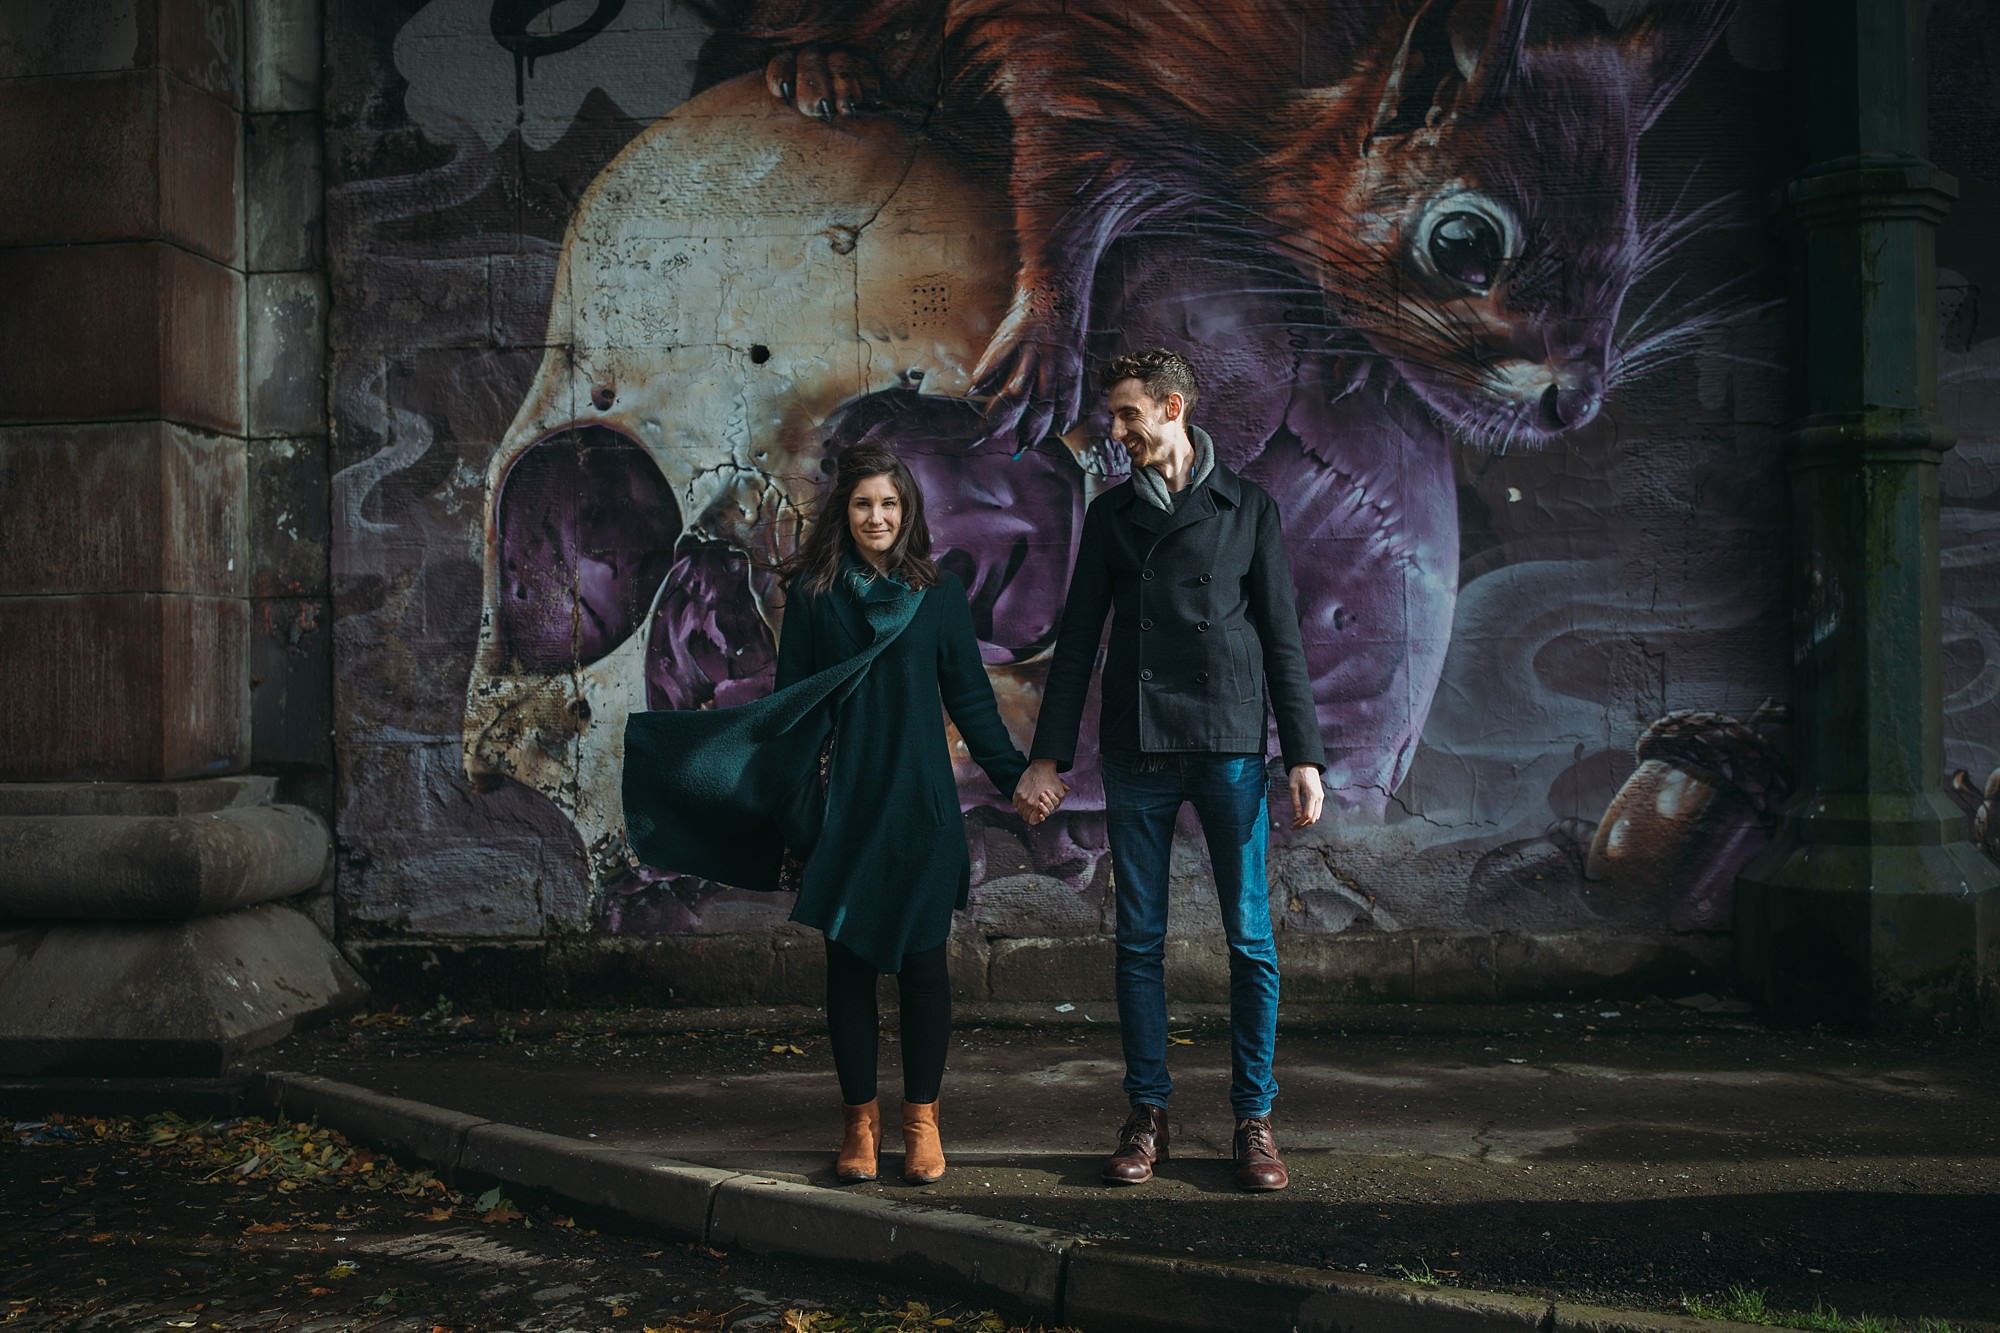 West End Engagement Photography | Frankie & Phil, Glasgow